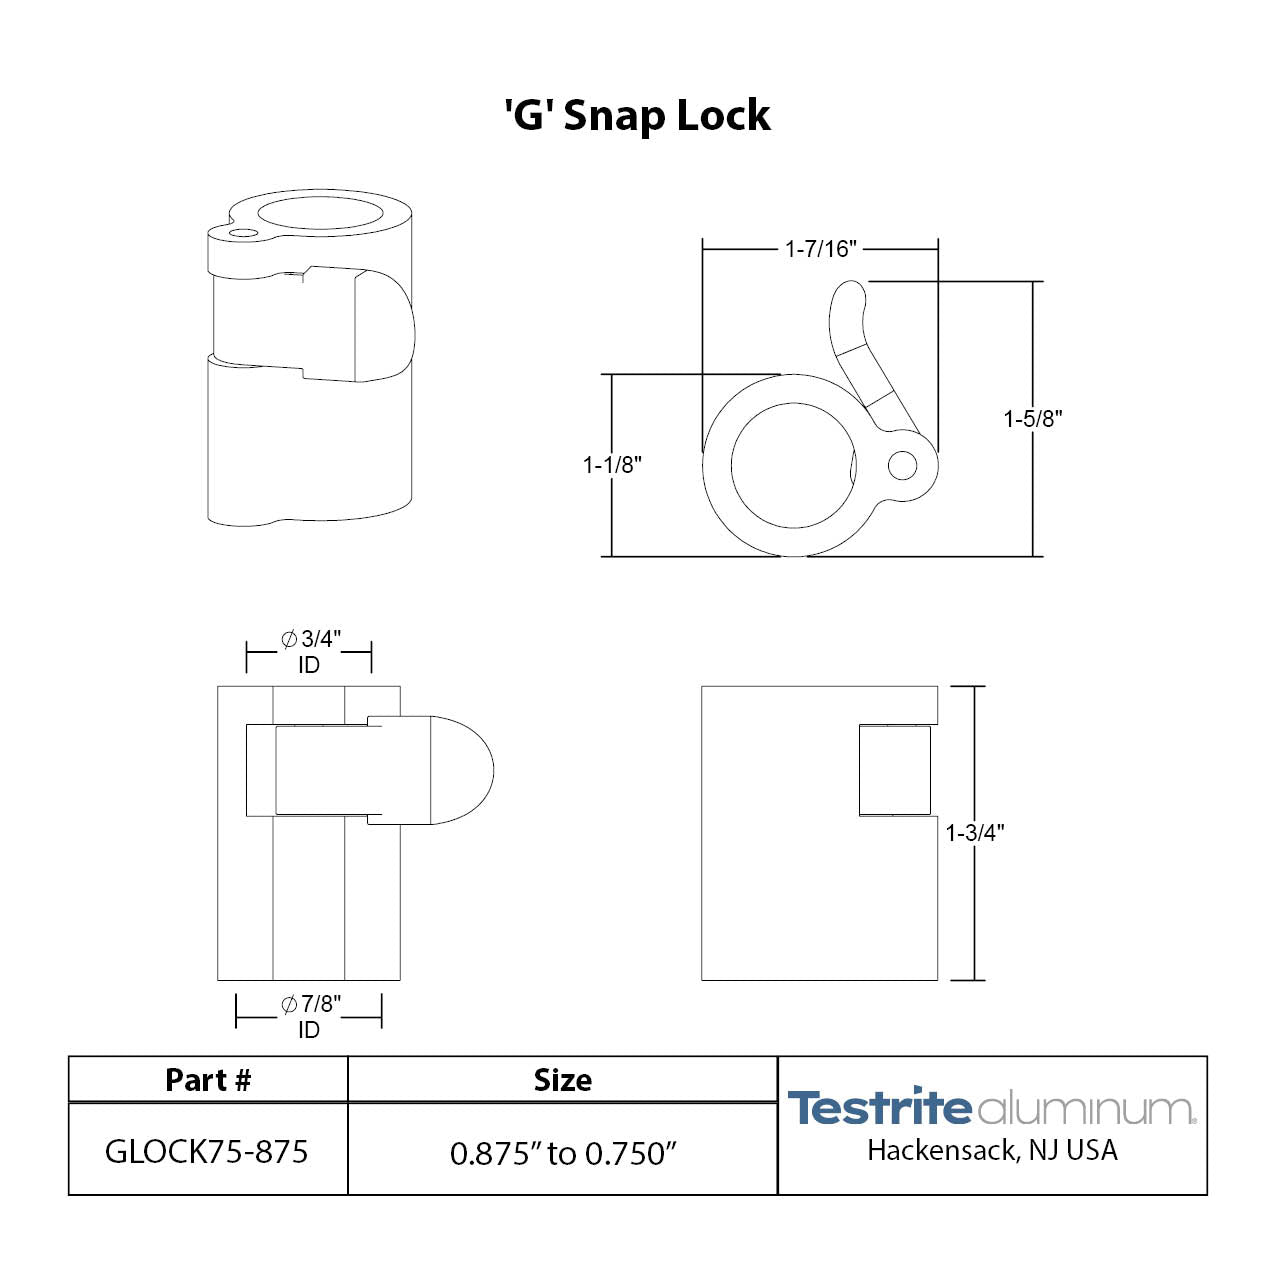 G Lock Spec sheet 3/4" to 7/8", telescopic tubing clamp 0.75" to 0.875"